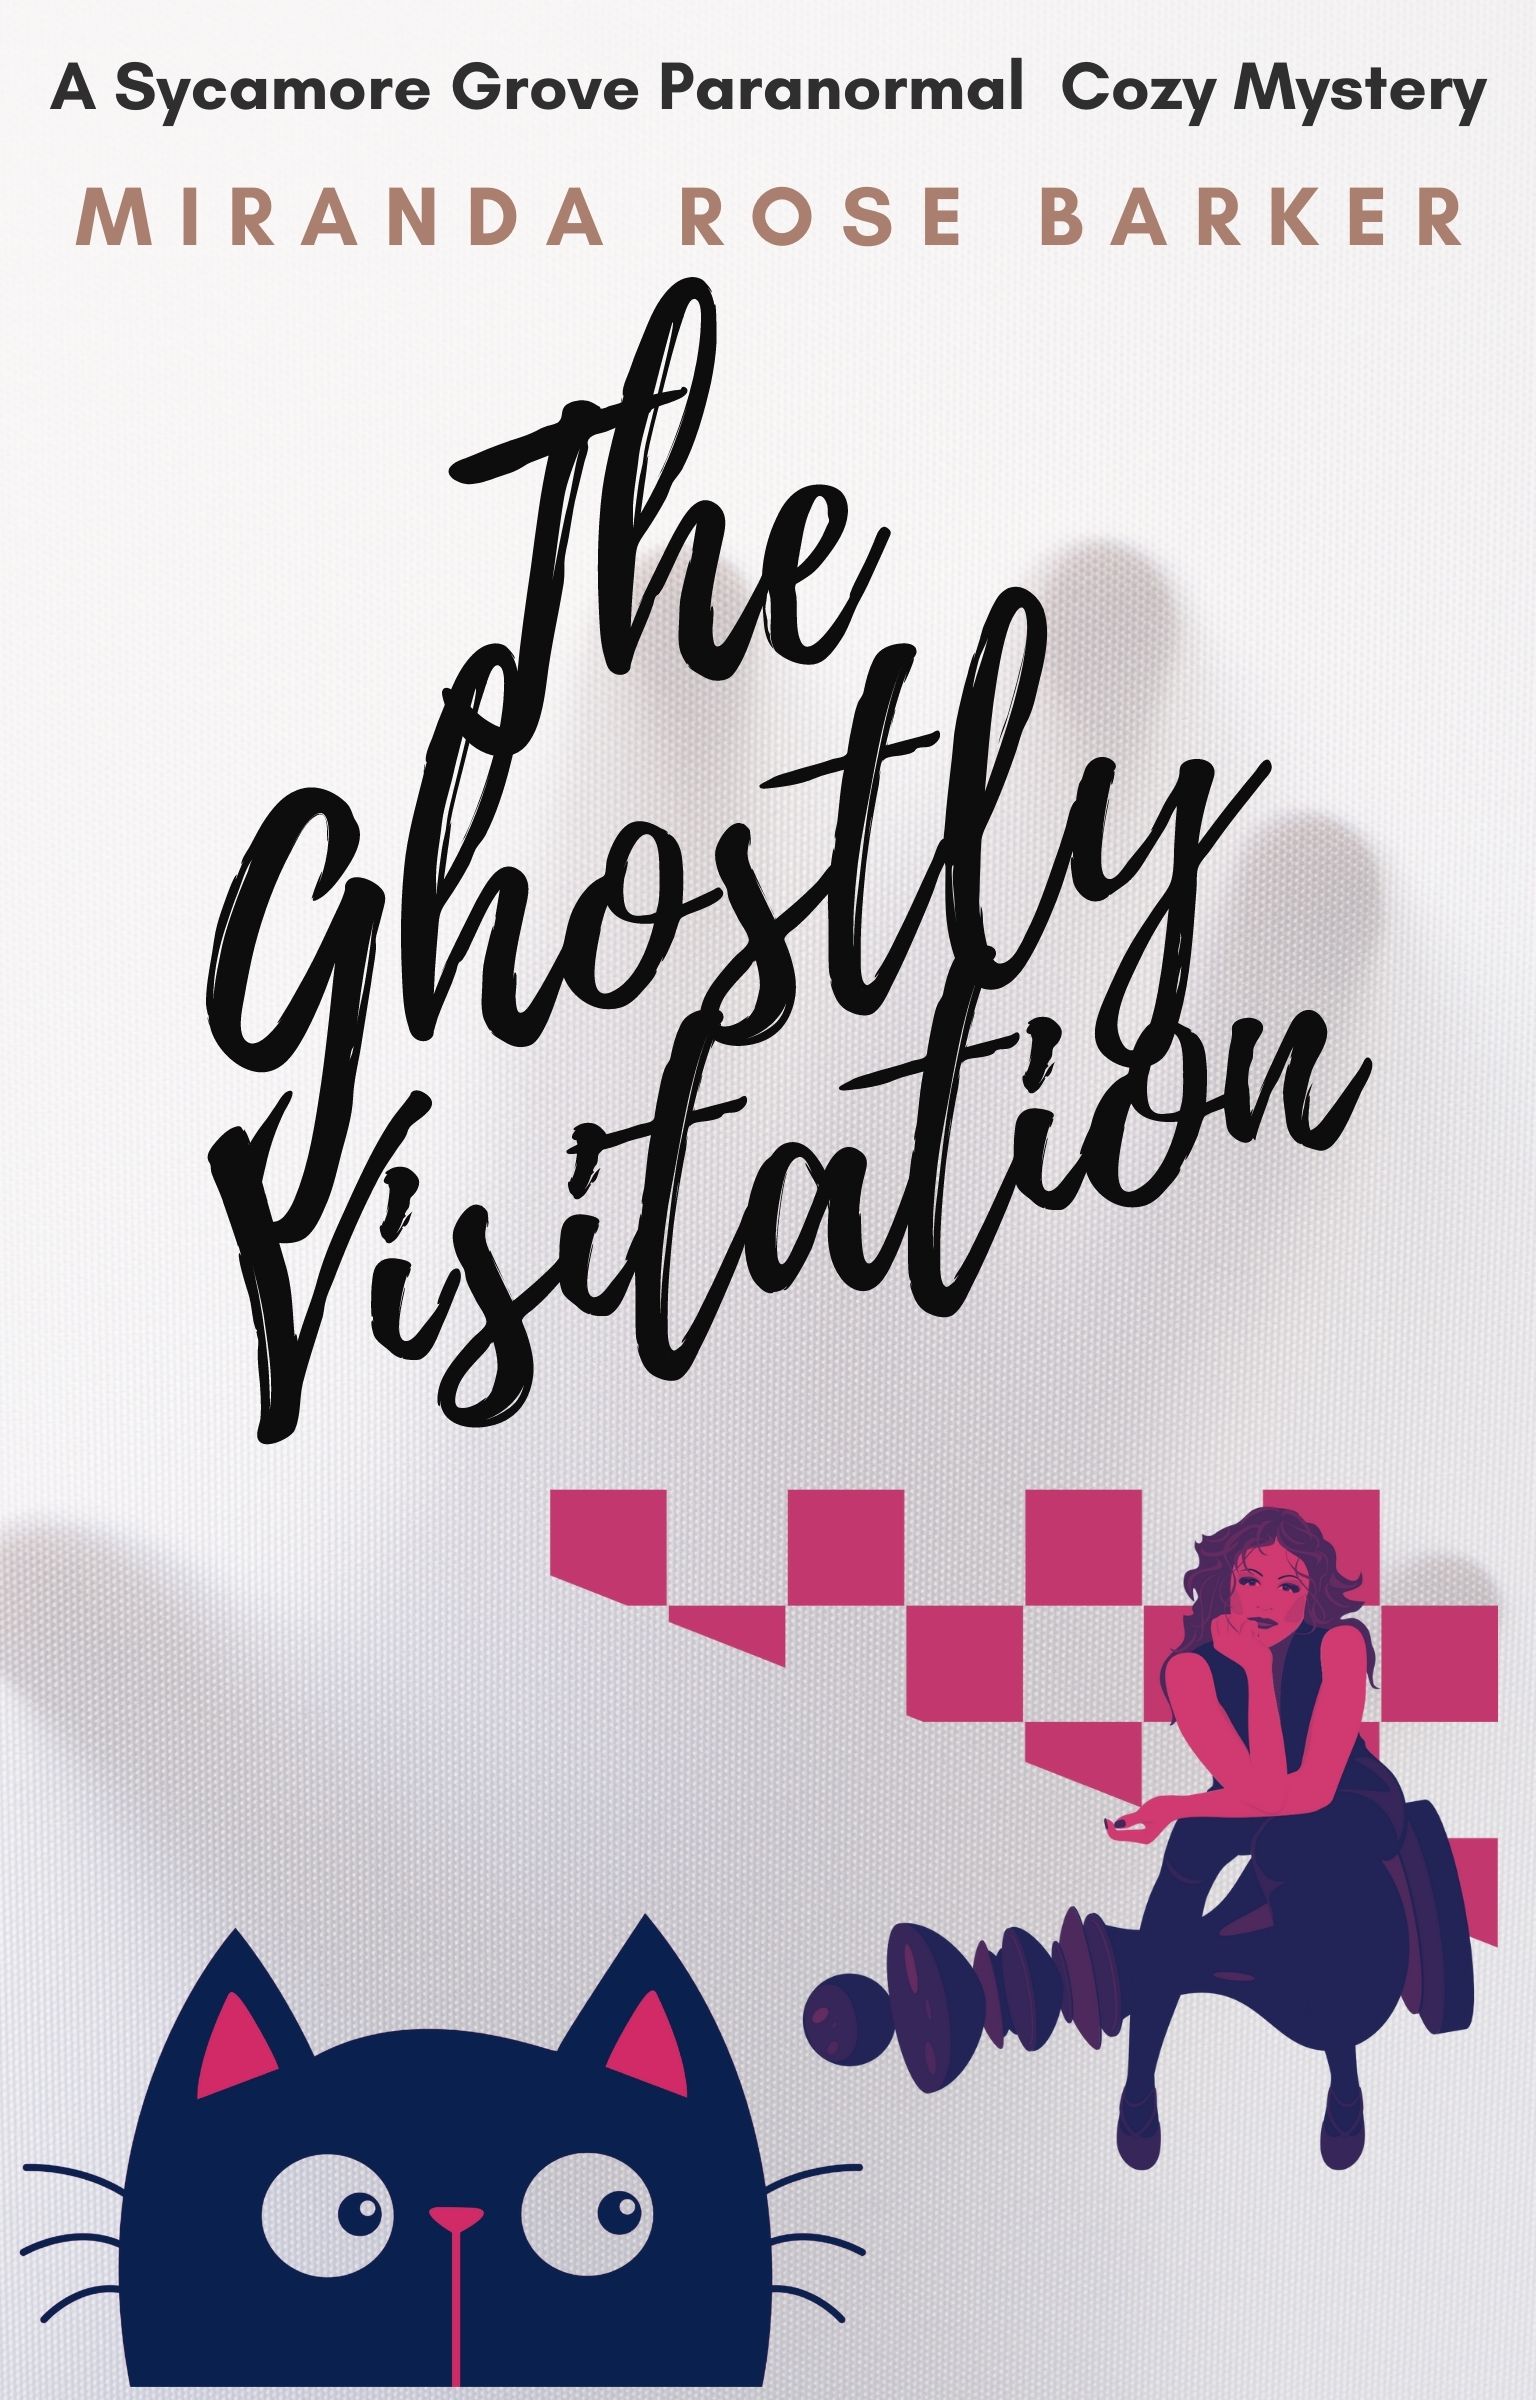 The Ghostly Visitation: A Sycamore Grove Paranormal Cozy Mystery by Miranda Rose Barker